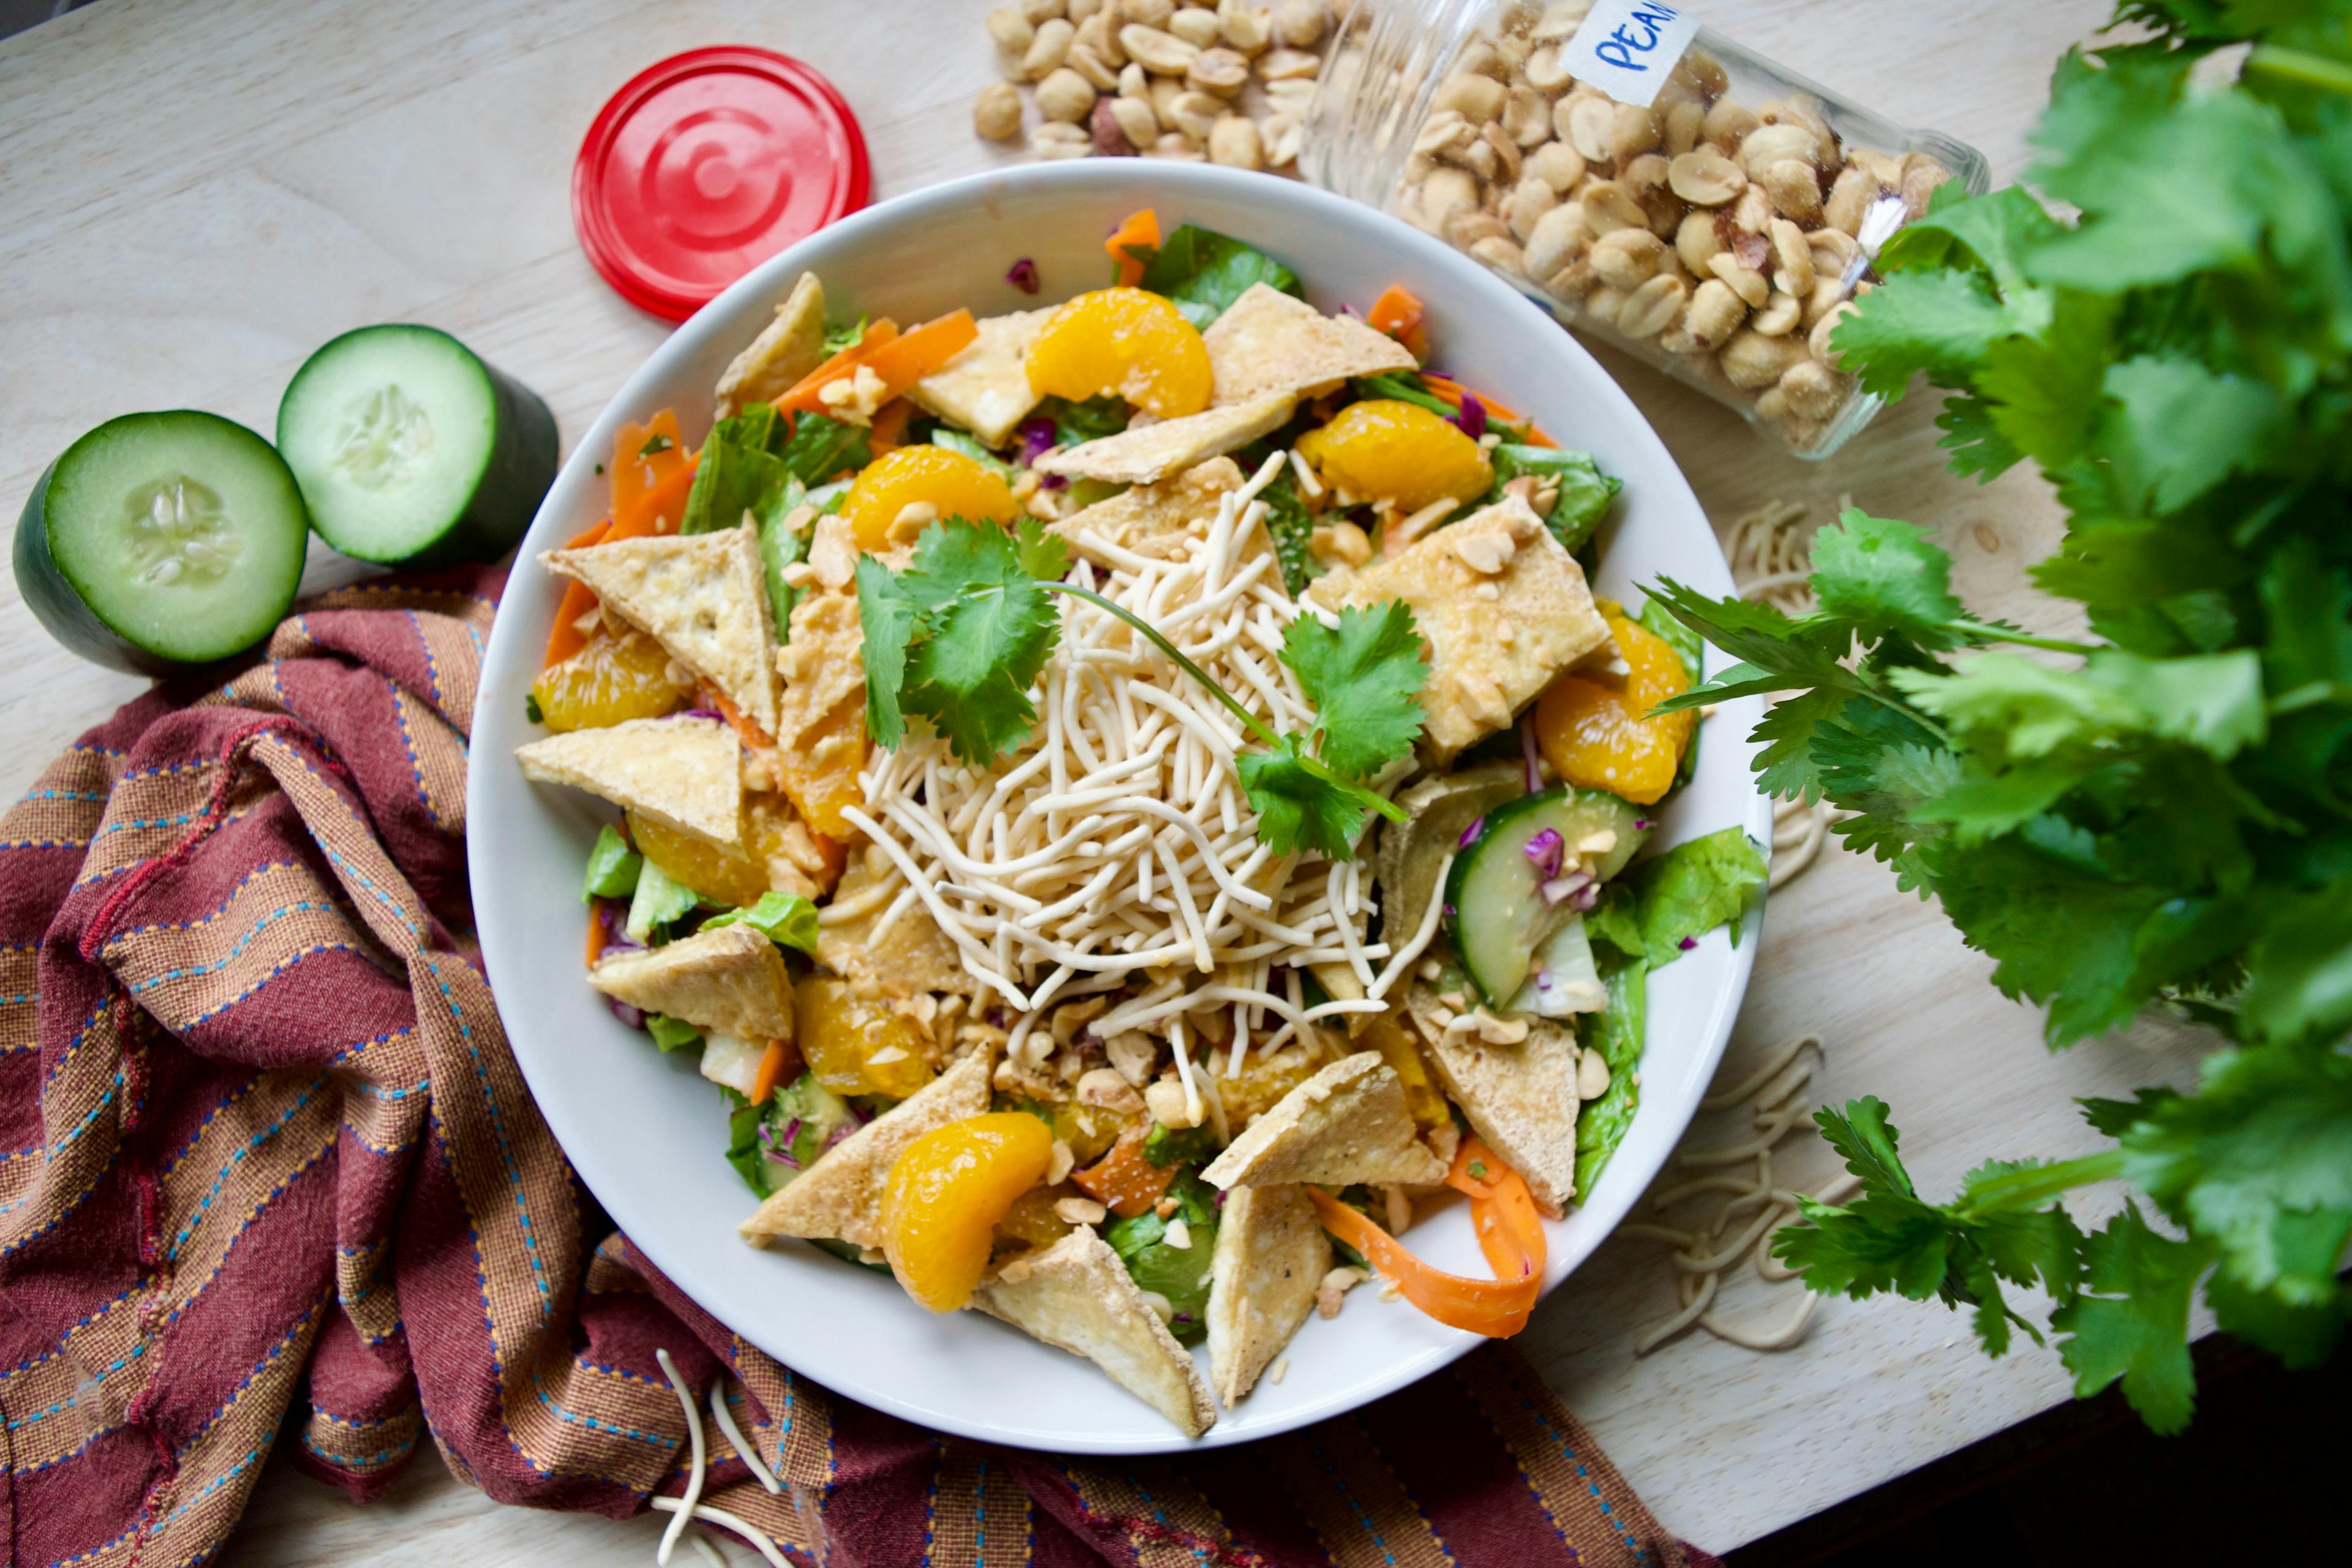 A large plate of a salad artfully surrounded by some of the ingredients within such as cucumbers, cilantro, and peanuts. The salad visibly contains carrots, chow mein noodles, fried tofu, and mandarin oranges.